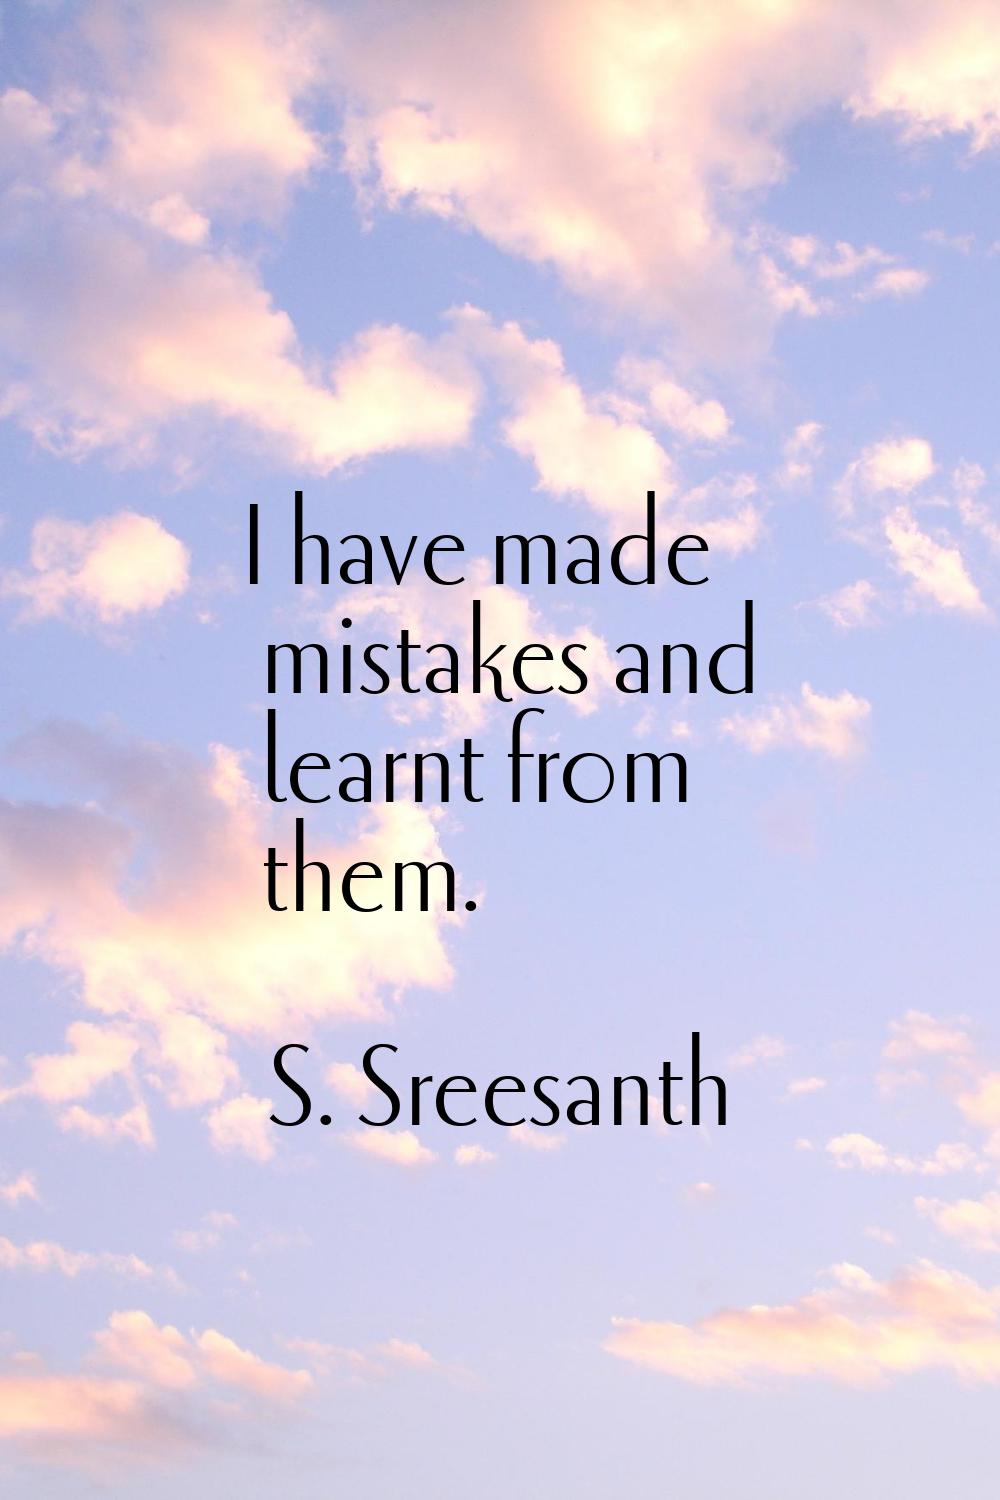 I have made mistakes and learnt from them.